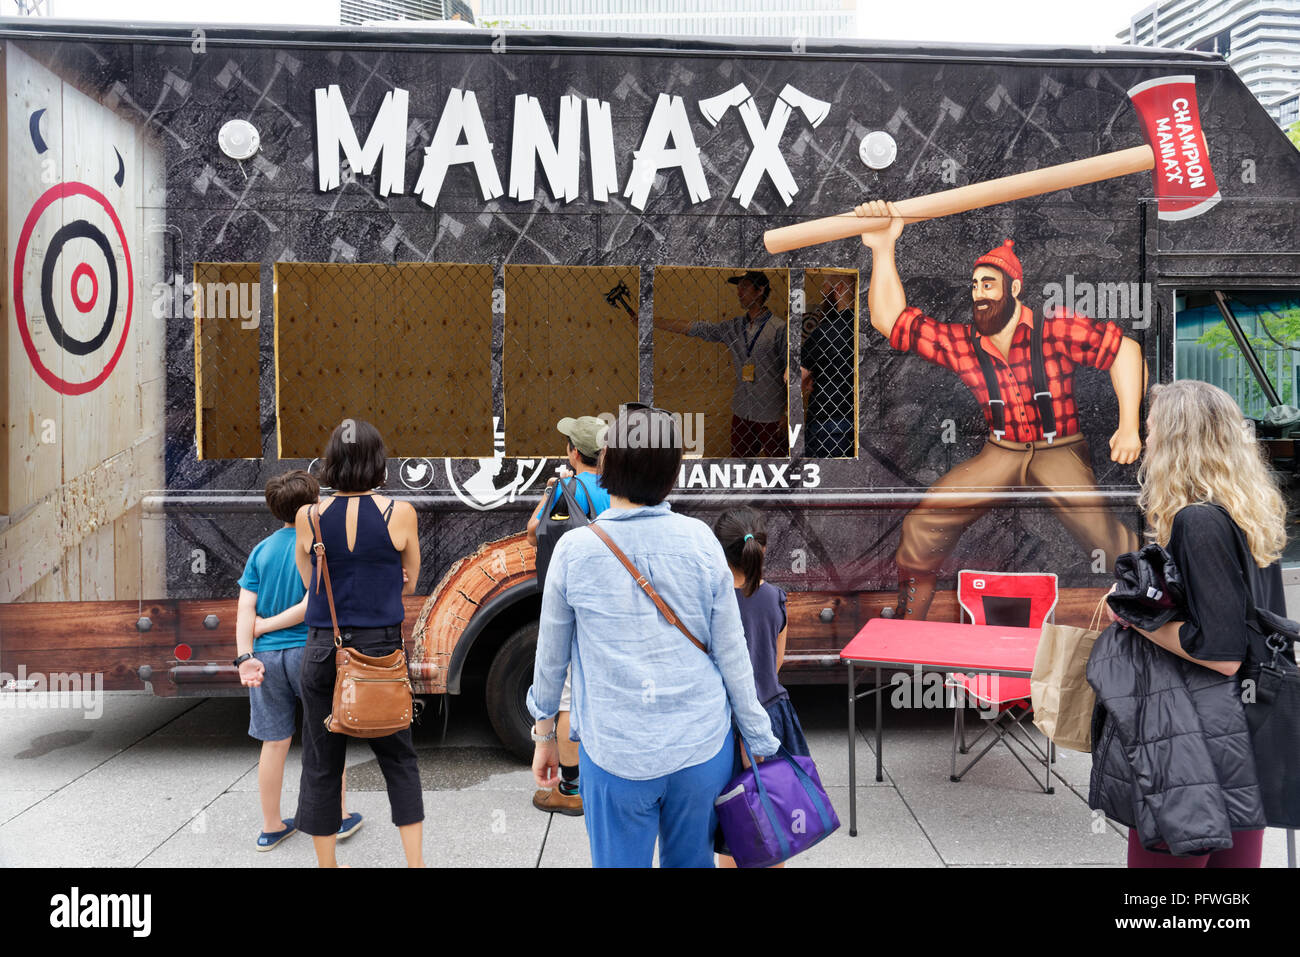 People watching an axe thrower in a Maniax mobile axe throwing game in the back of a truck Stock Photo